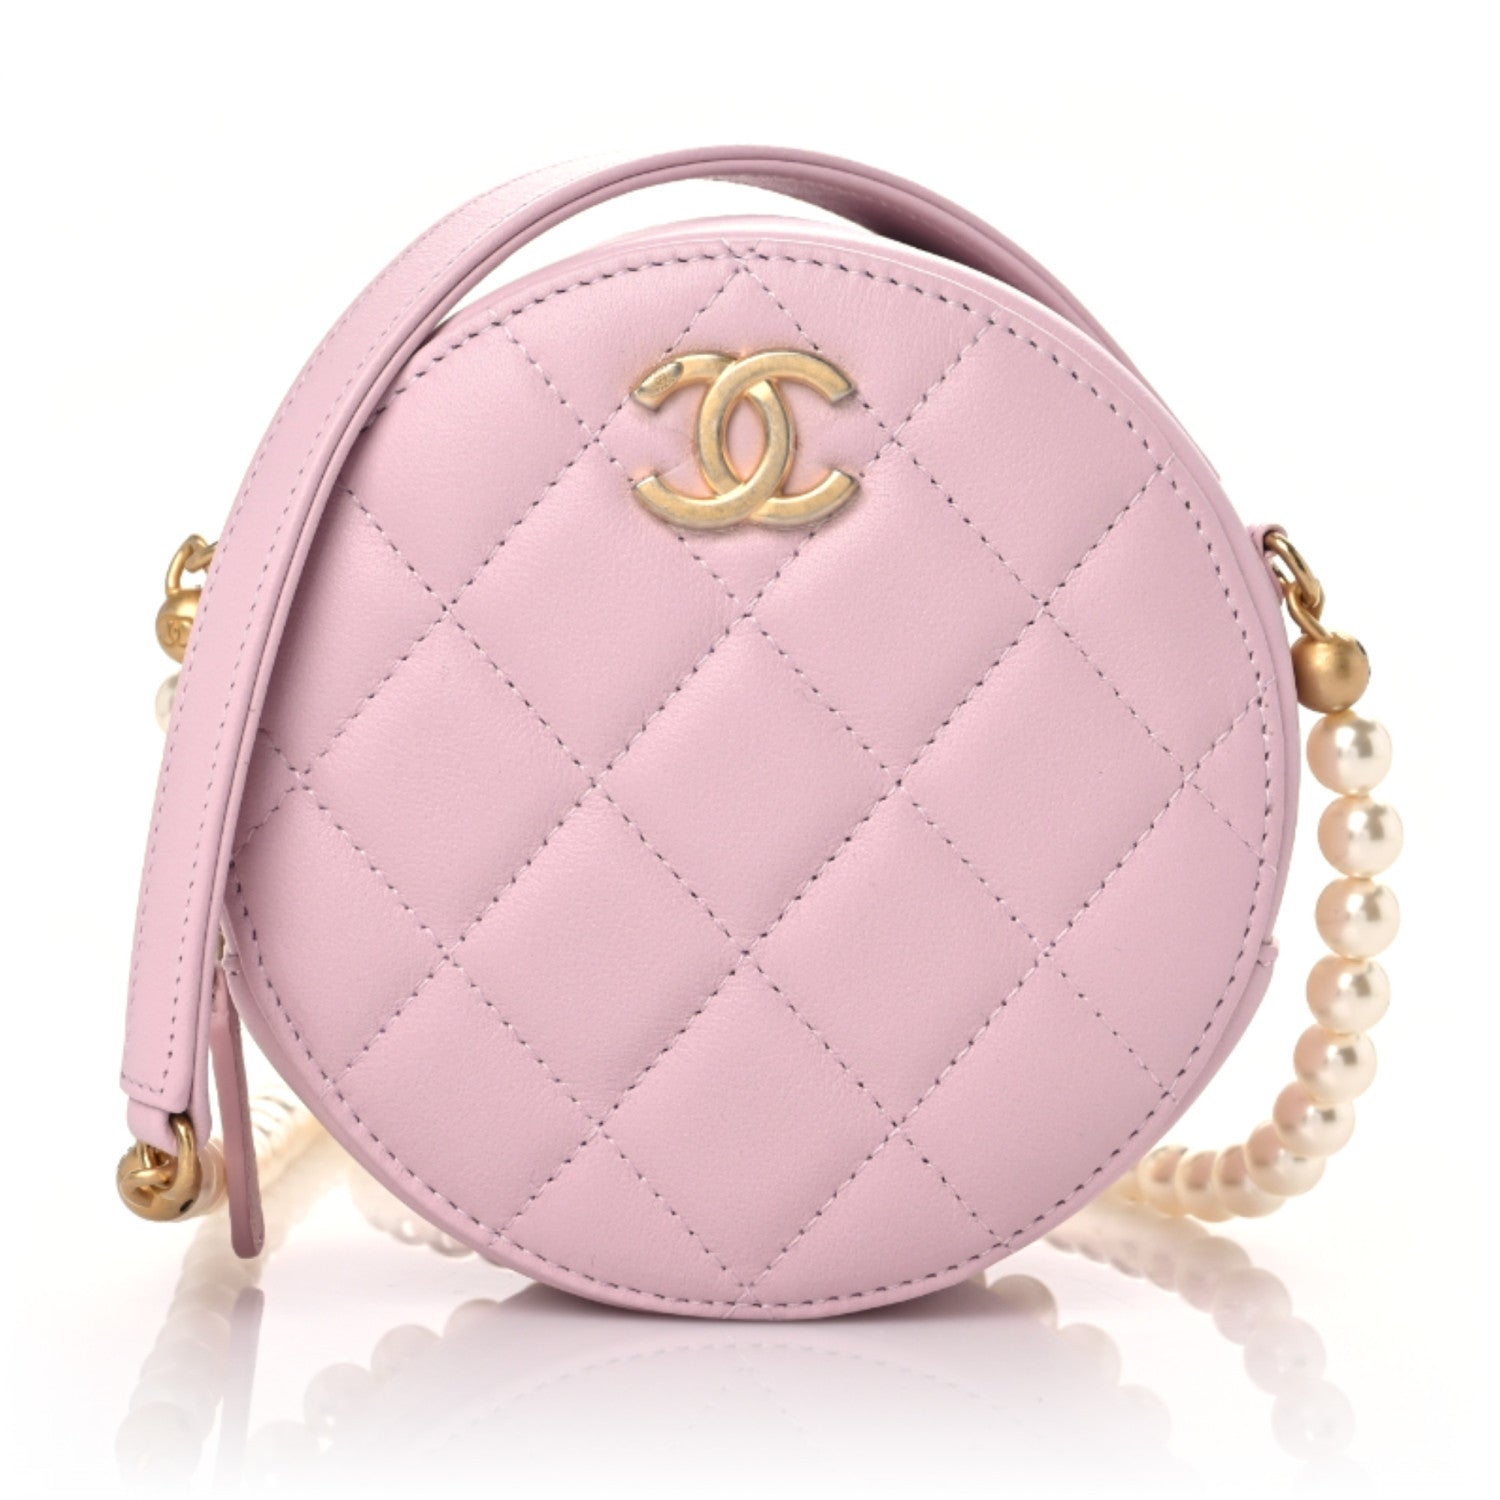 Chanel Patent Quilted Circle Bag  Selena Gomez Loves Her Mini Louis  Vuitton Bag So Much She Found a Way to Carry It From Day to Night   POPSUGAR Fashion Photo 14